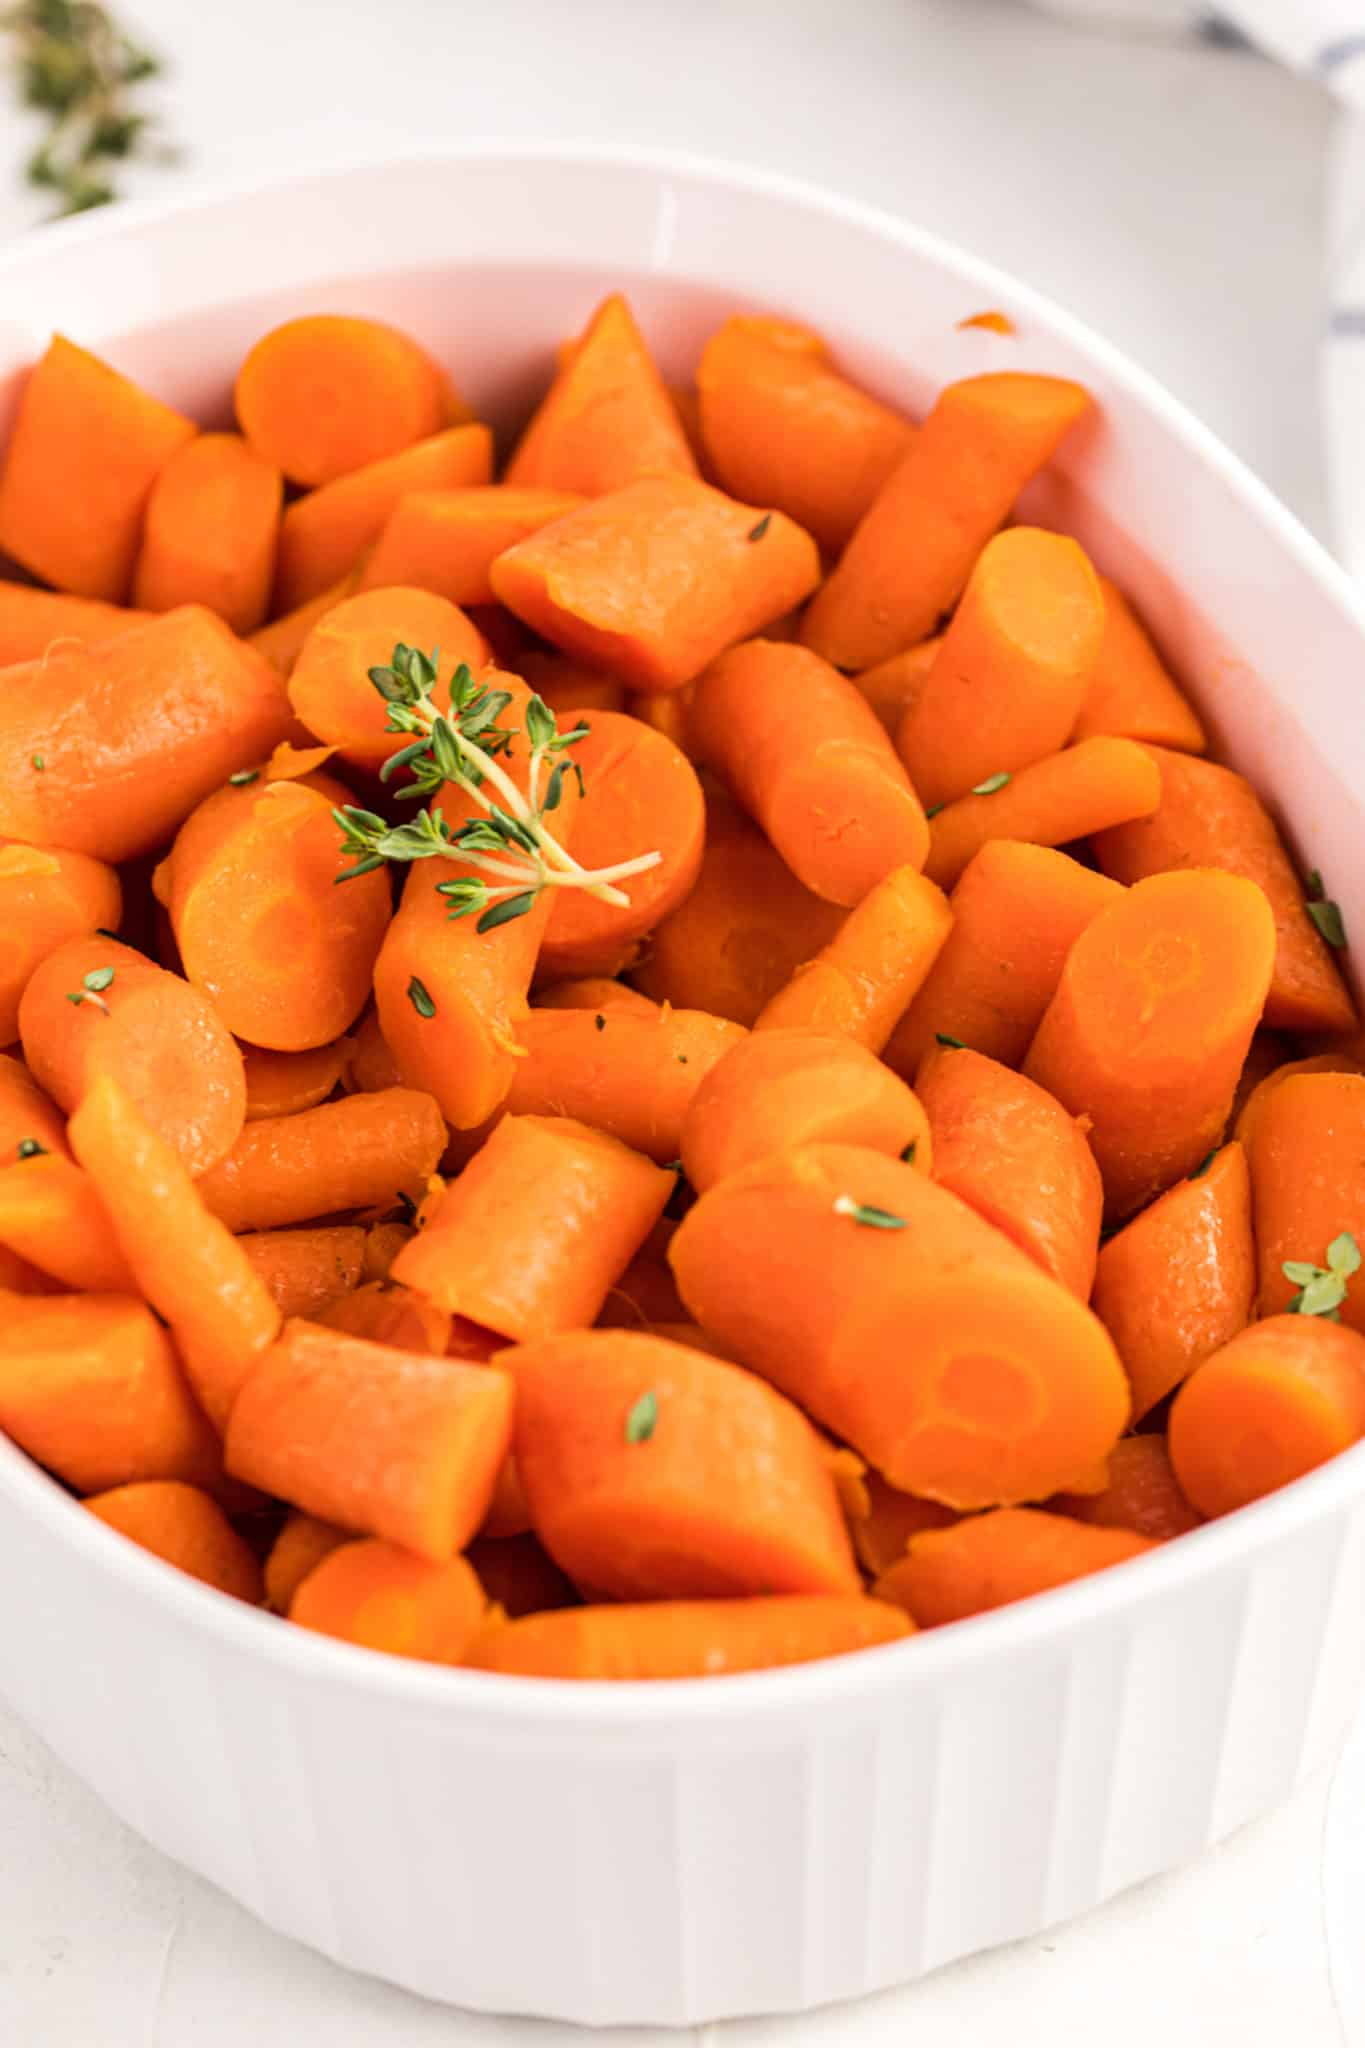 A close up of cooked carrots with fresh thyme on top.